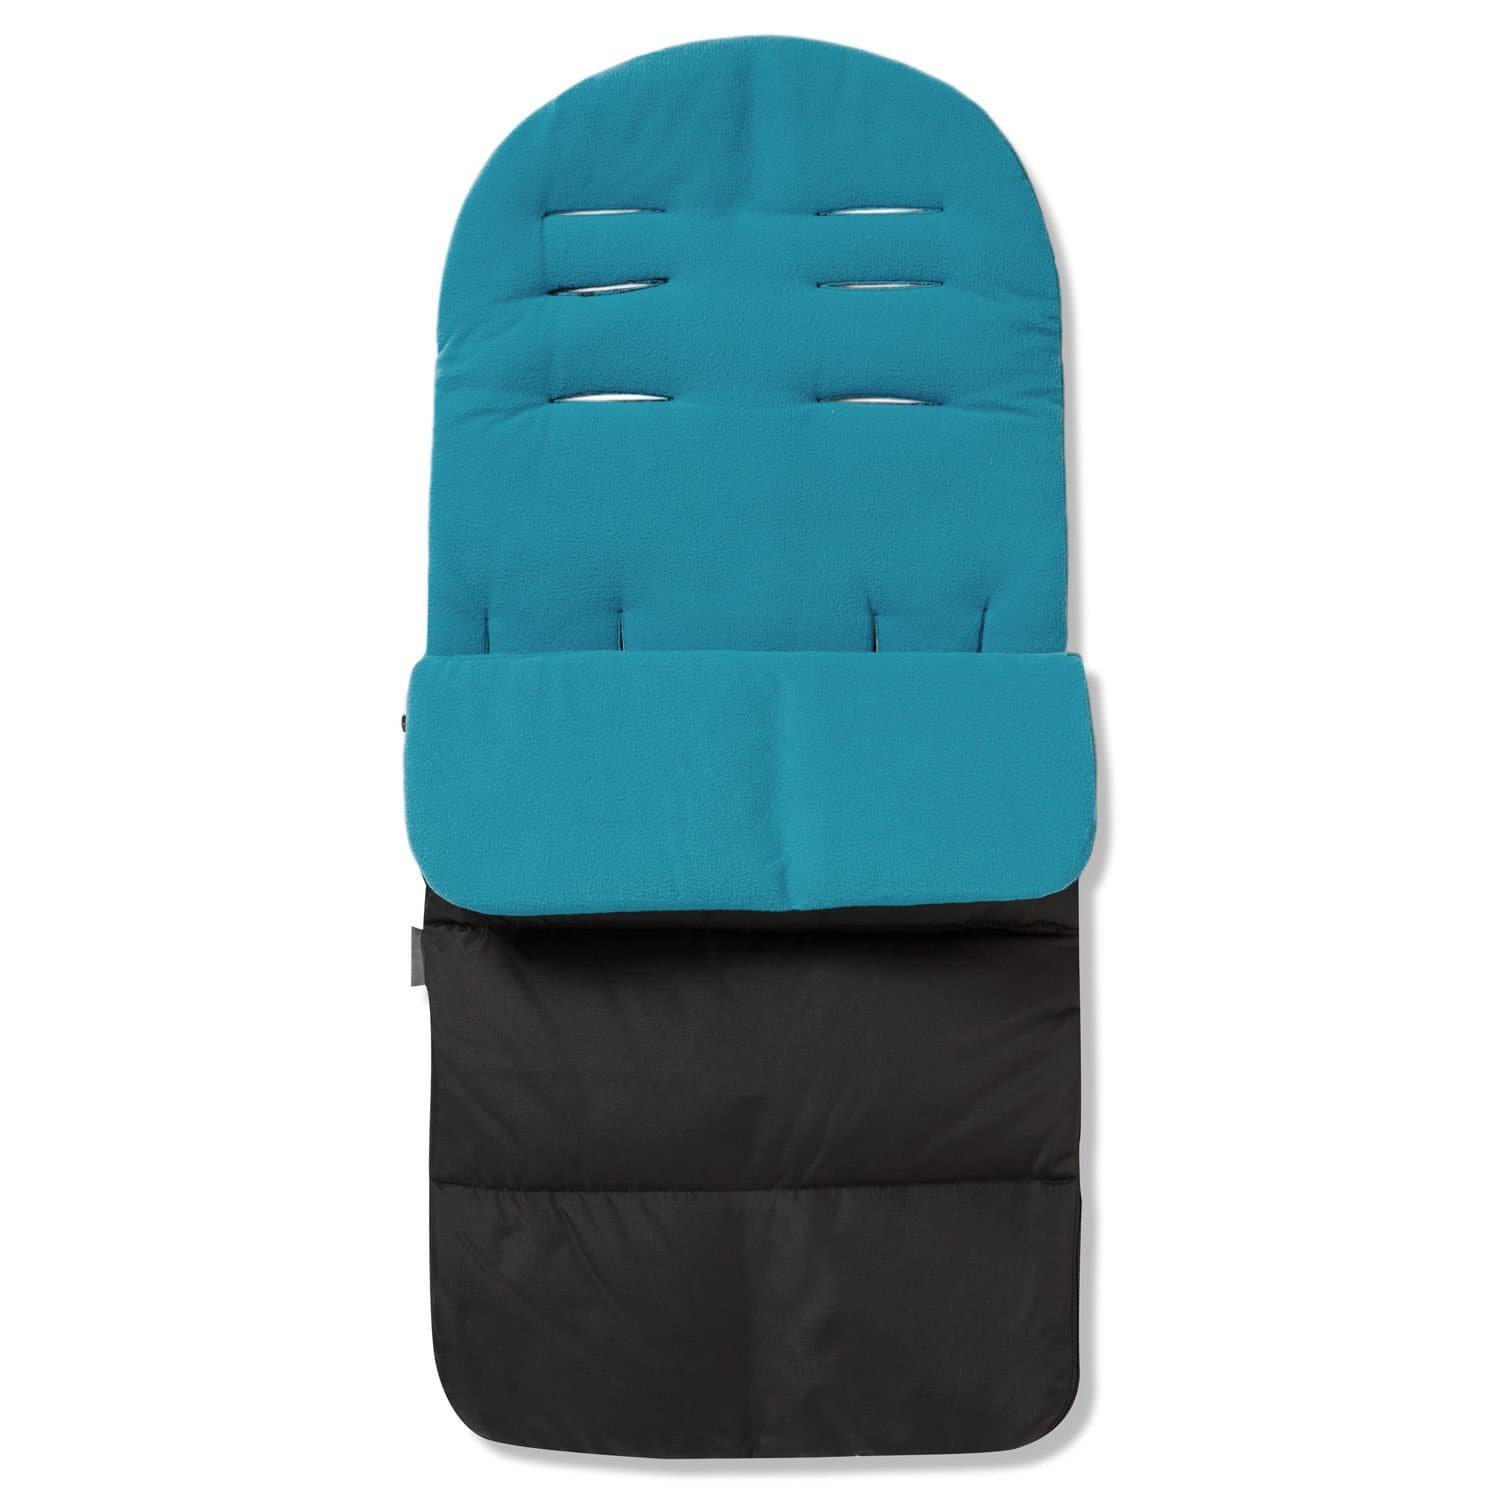 Premium Footmuff / Cosy Toes Compatible with Britax - Ocean Blue / Fits All Models | For Your Little One